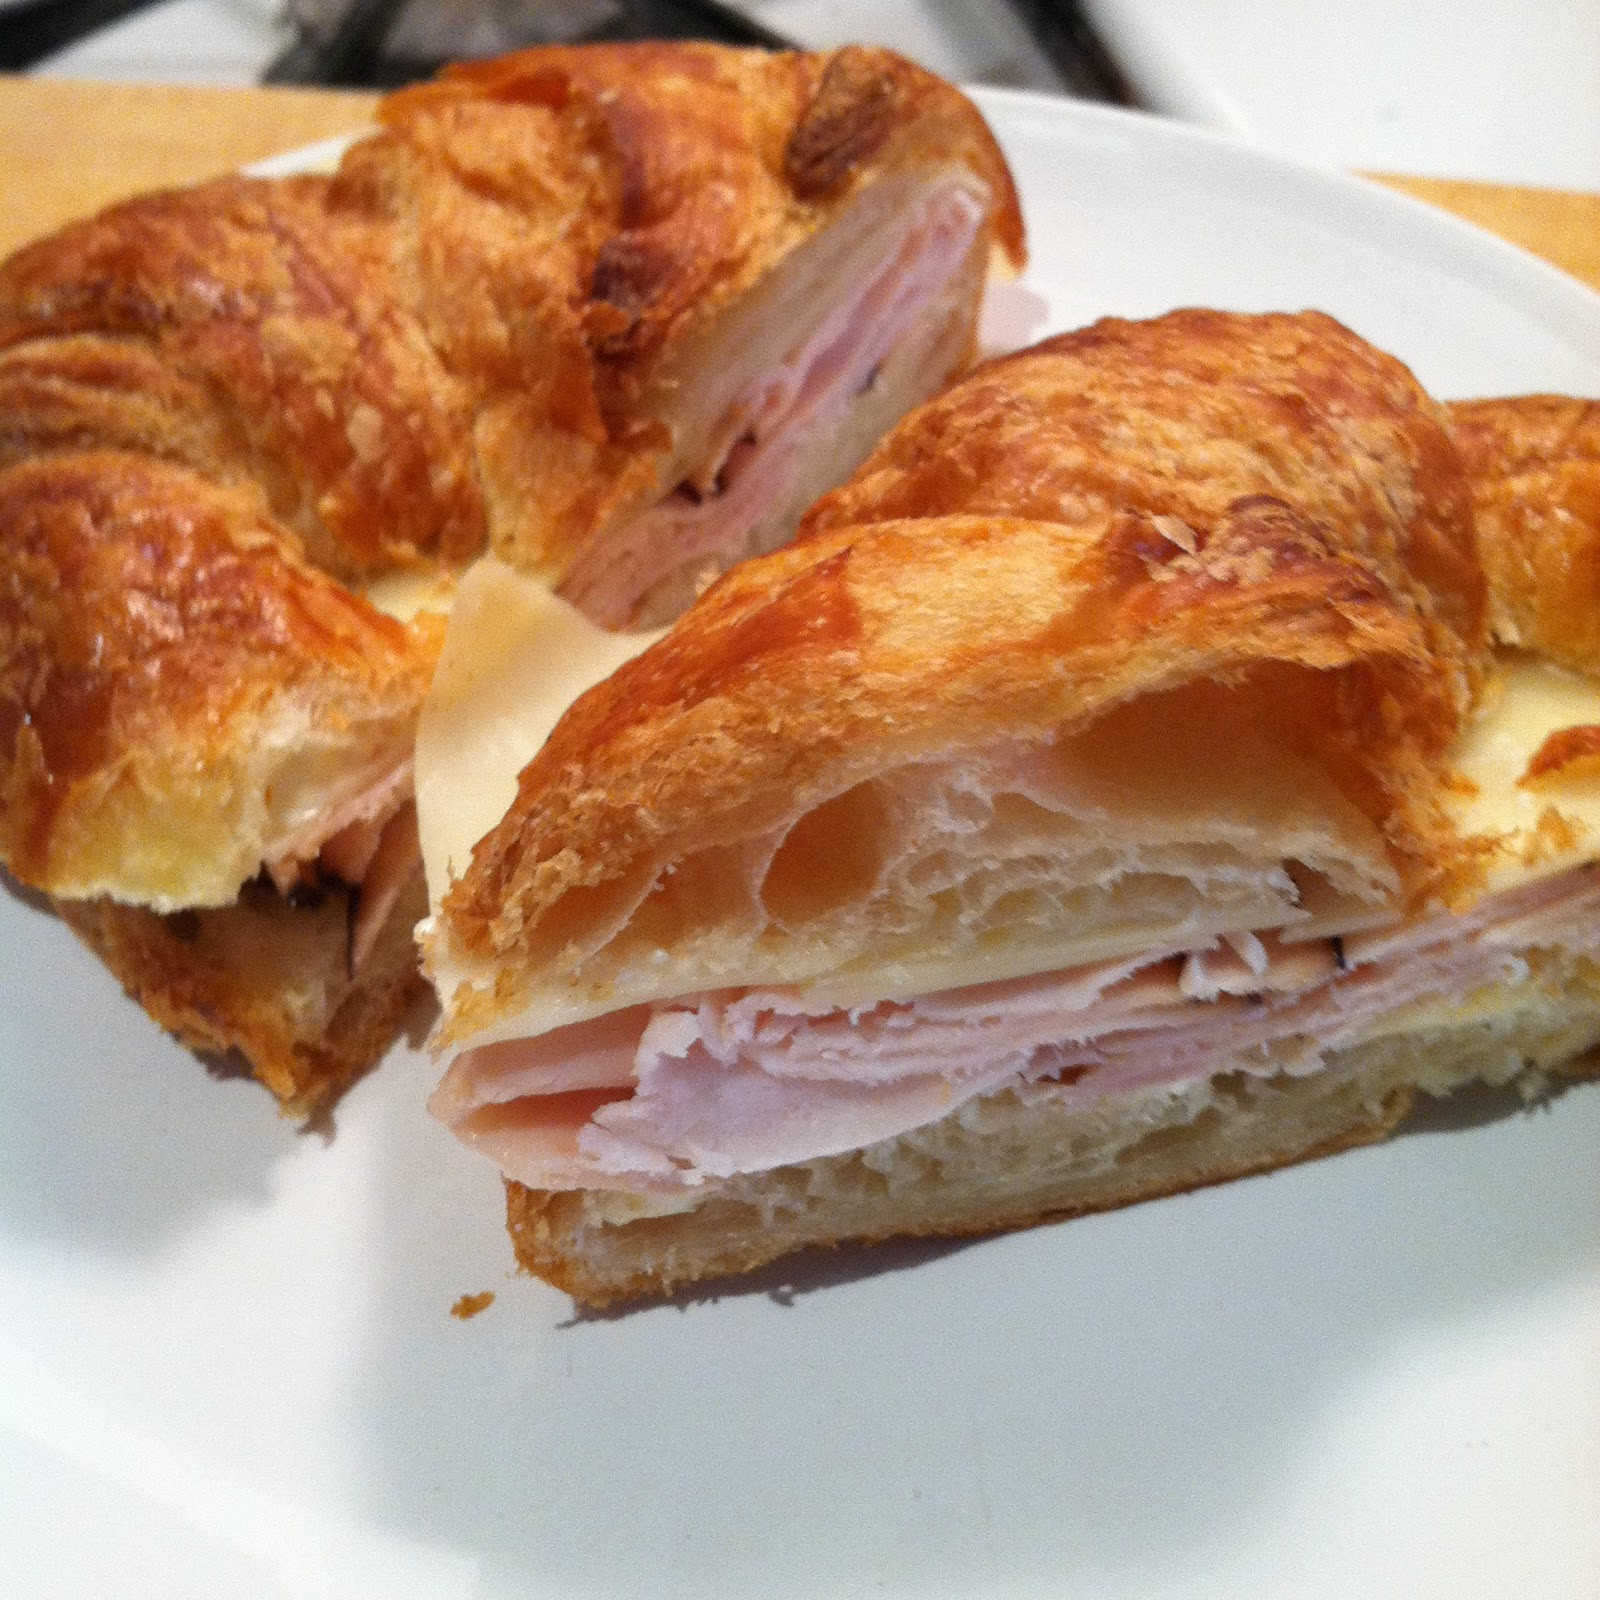 Turkey And Swiss Sandwiches
 Quest for Delish Turkey and Swiss on a Croissant